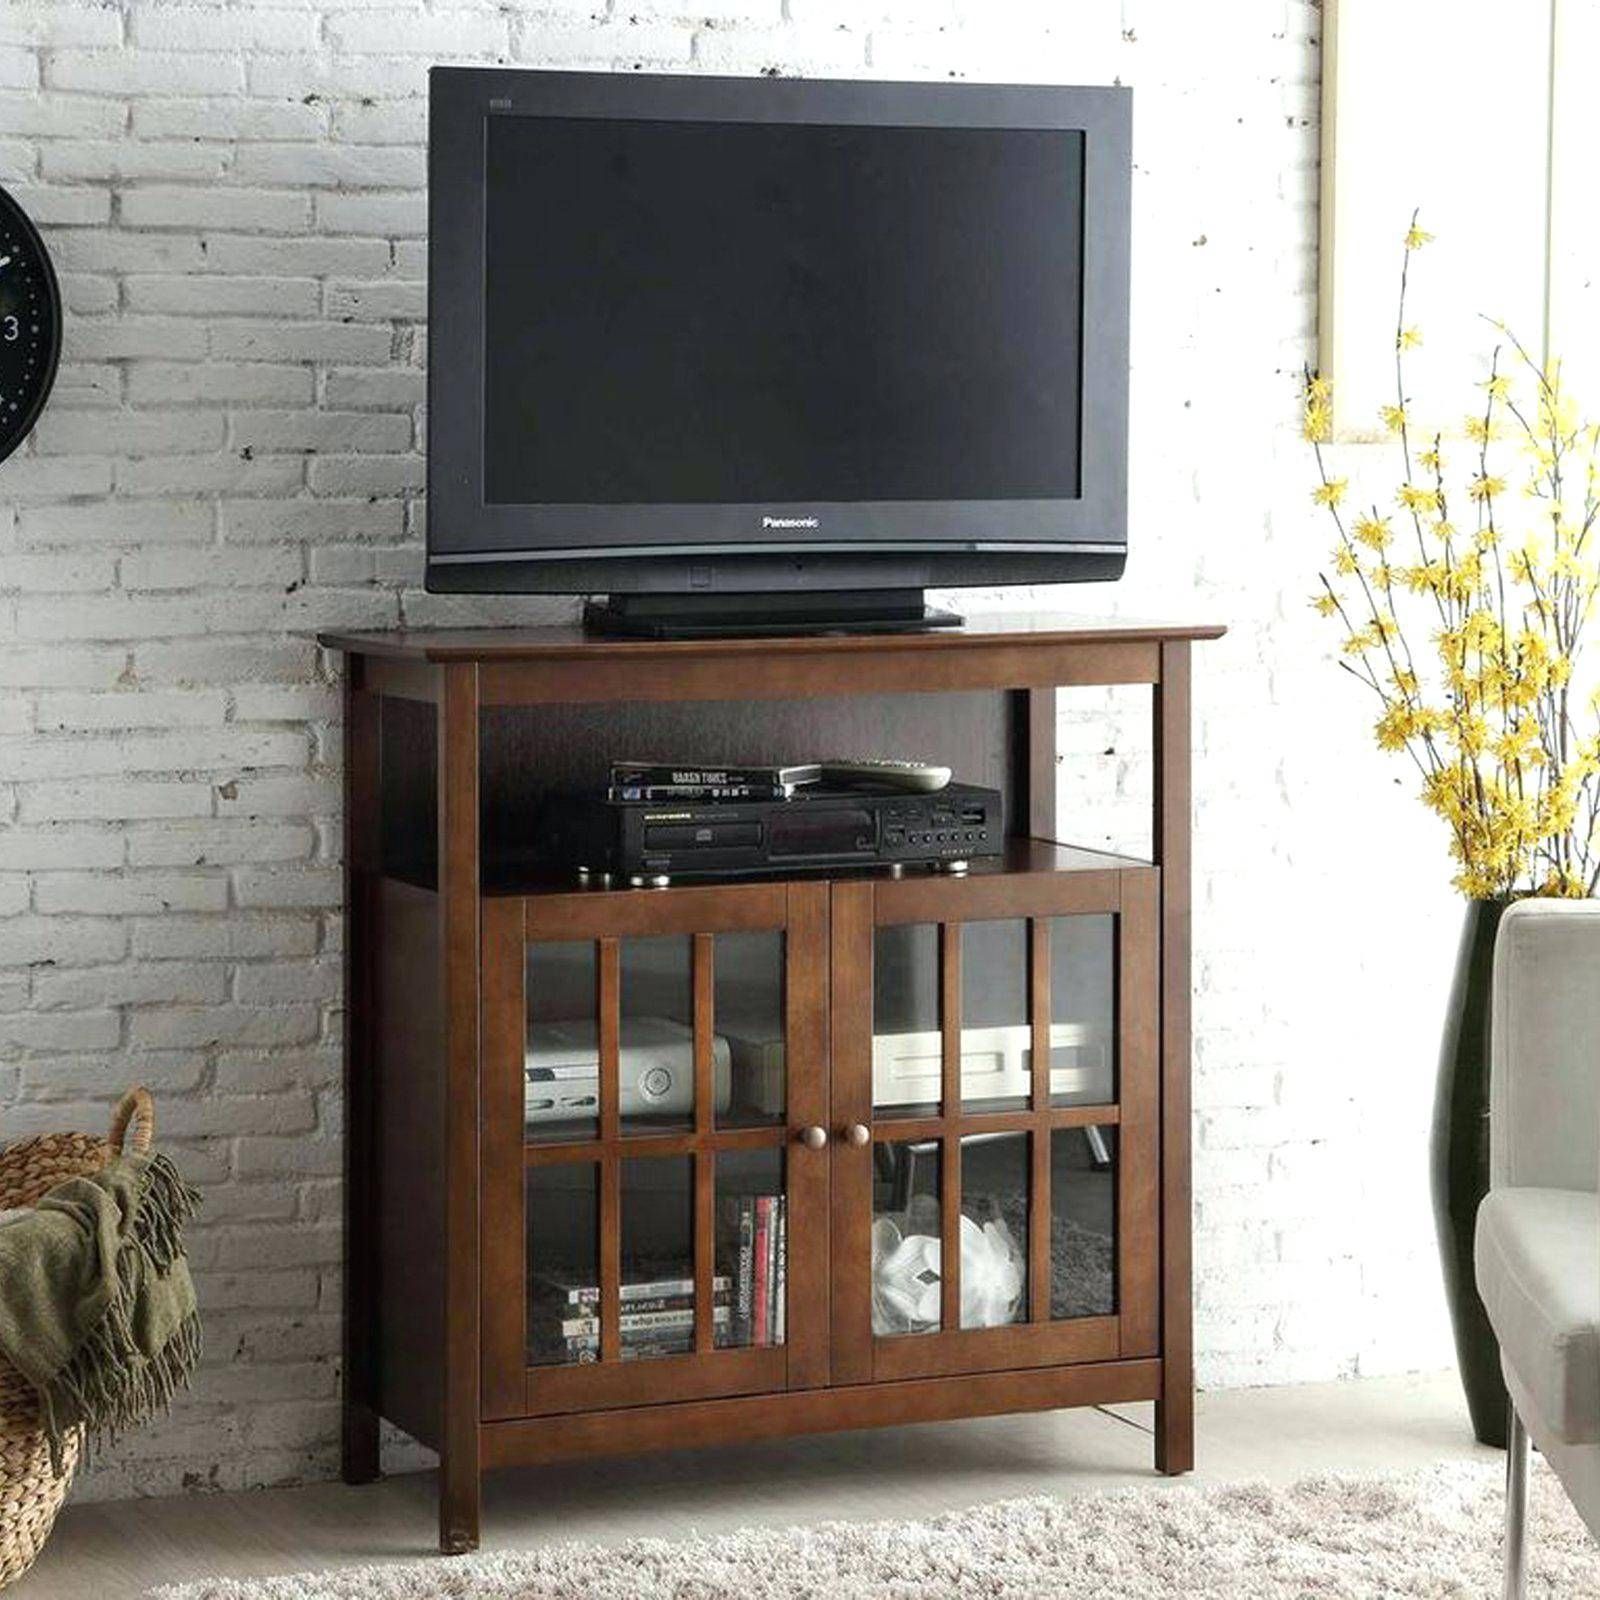 Tv Stand : Extra Wide Oak Tv Stand 119 Splendid Large Size Of Tv Pertaining To Tv Stands 40 Inches Wide (View 1 of 15)